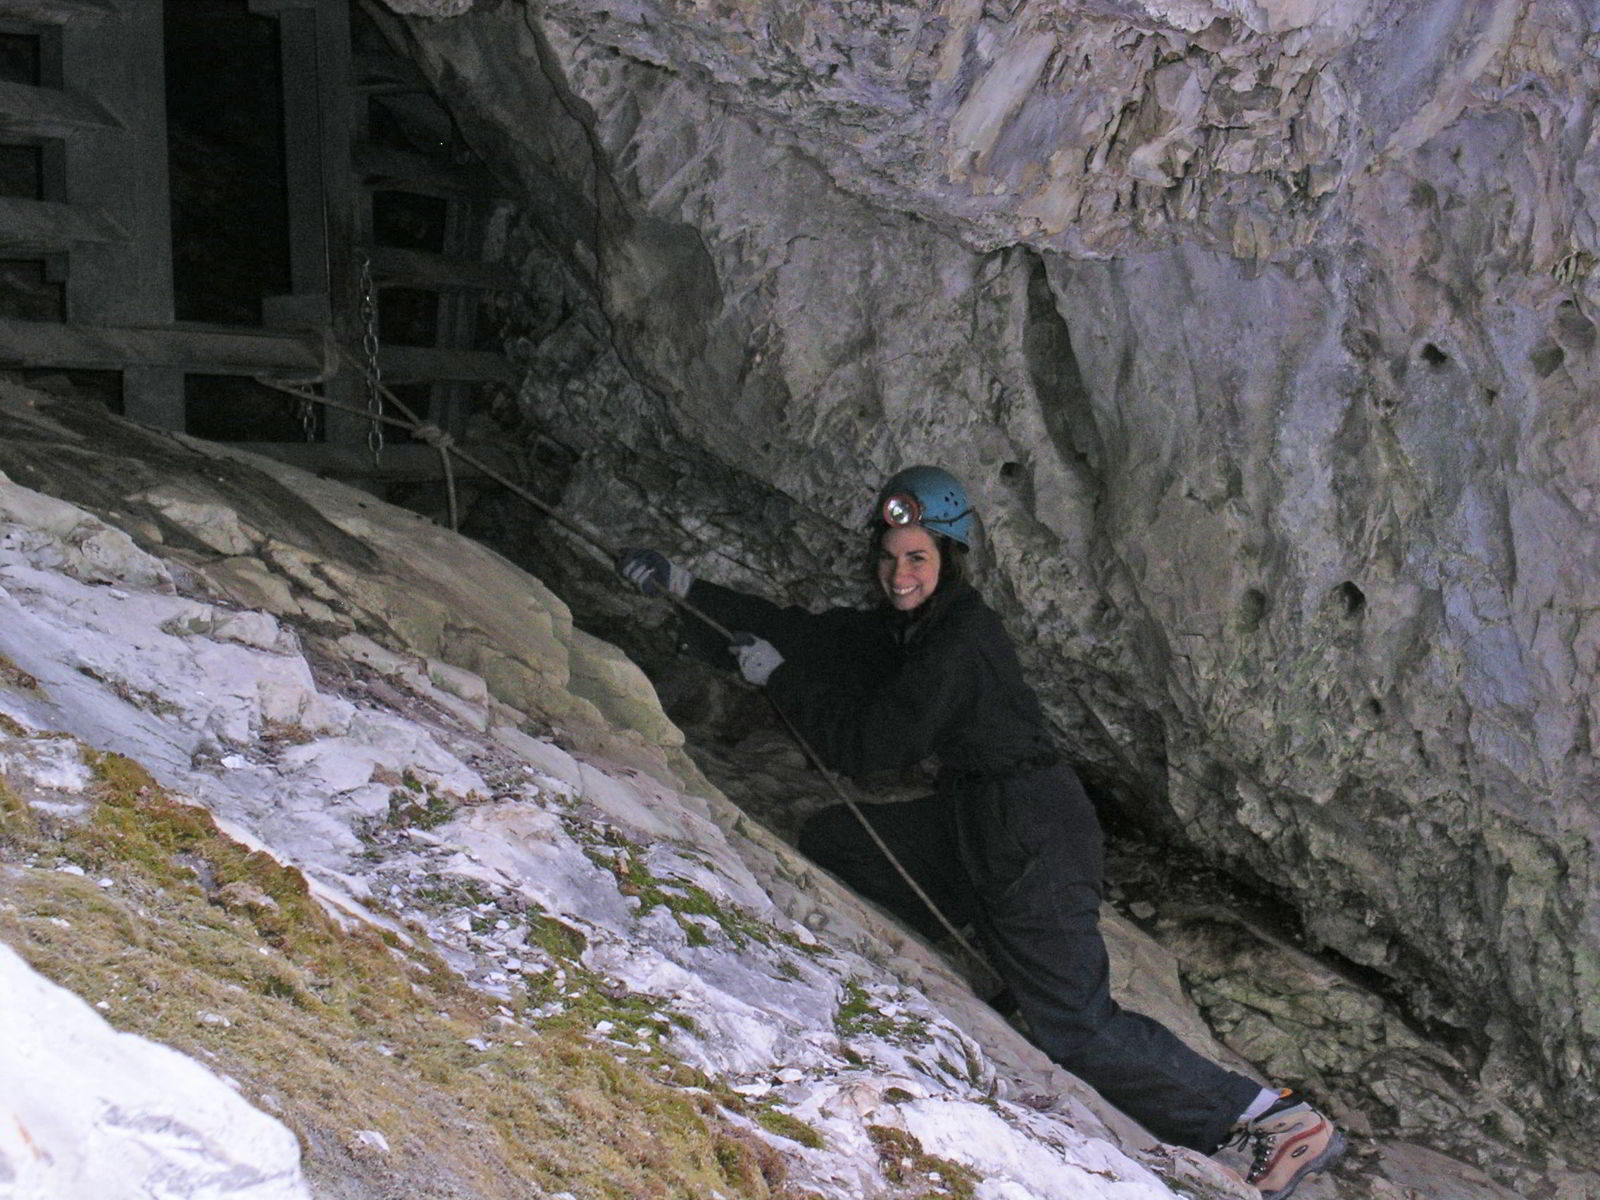 An image of a woman entering the Rat's Nest Cave in Canmore, Alberta